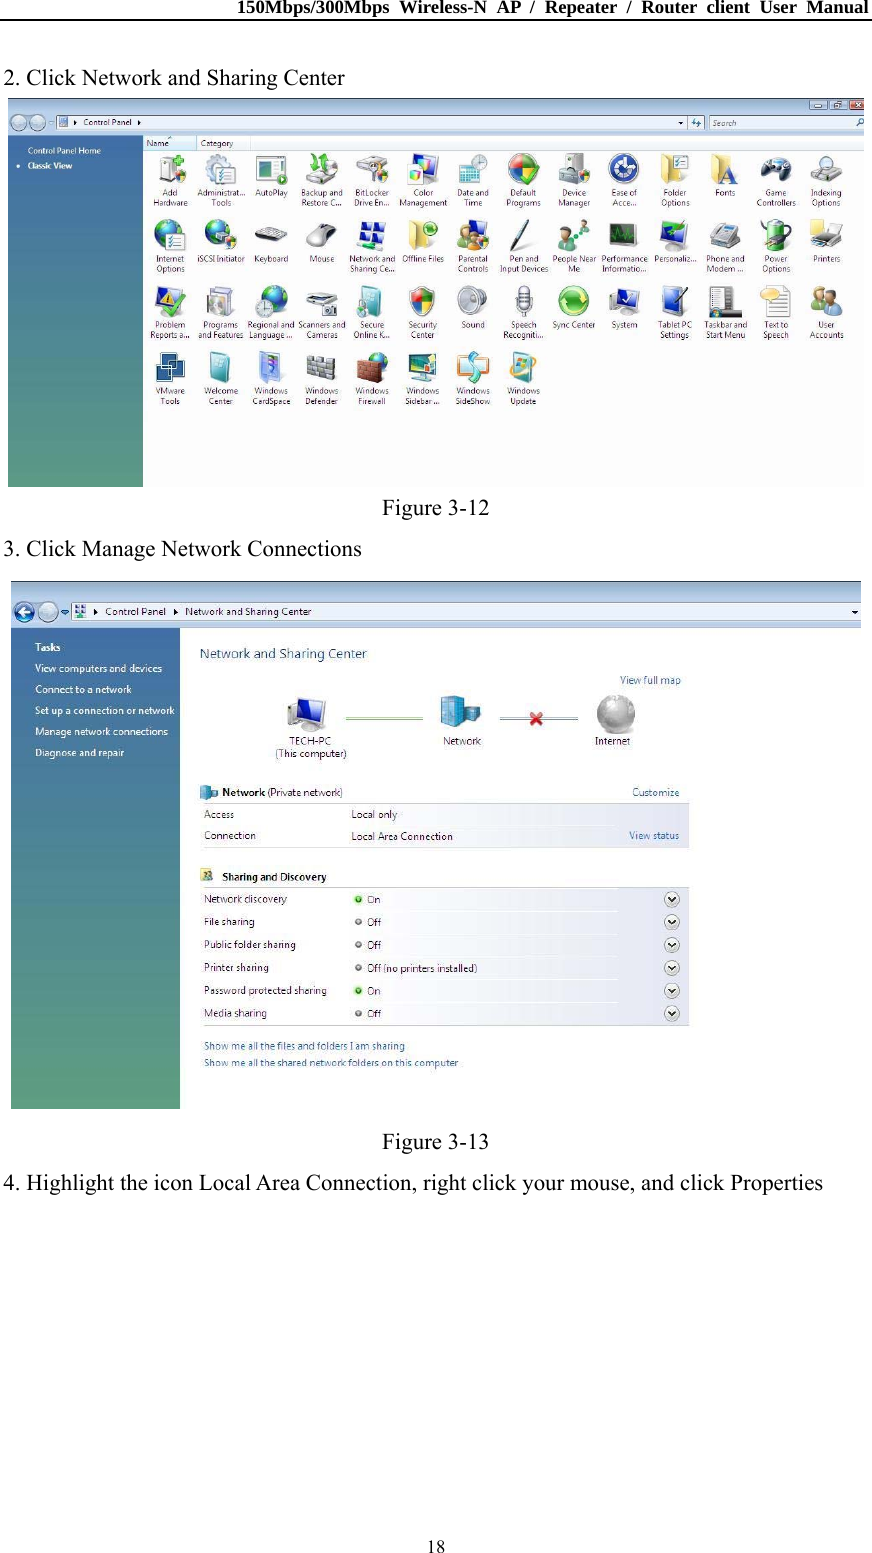 150Mbps/300Mbps Wireless-N AP / Repeater / Router client User Manual  182. Click Network and Sharing Center  Figure 3-12 3. Click Manage Network Connections  Figure 3-13 4. Highlight the icon Local Area Connection, right click your mouse, and click Properties 